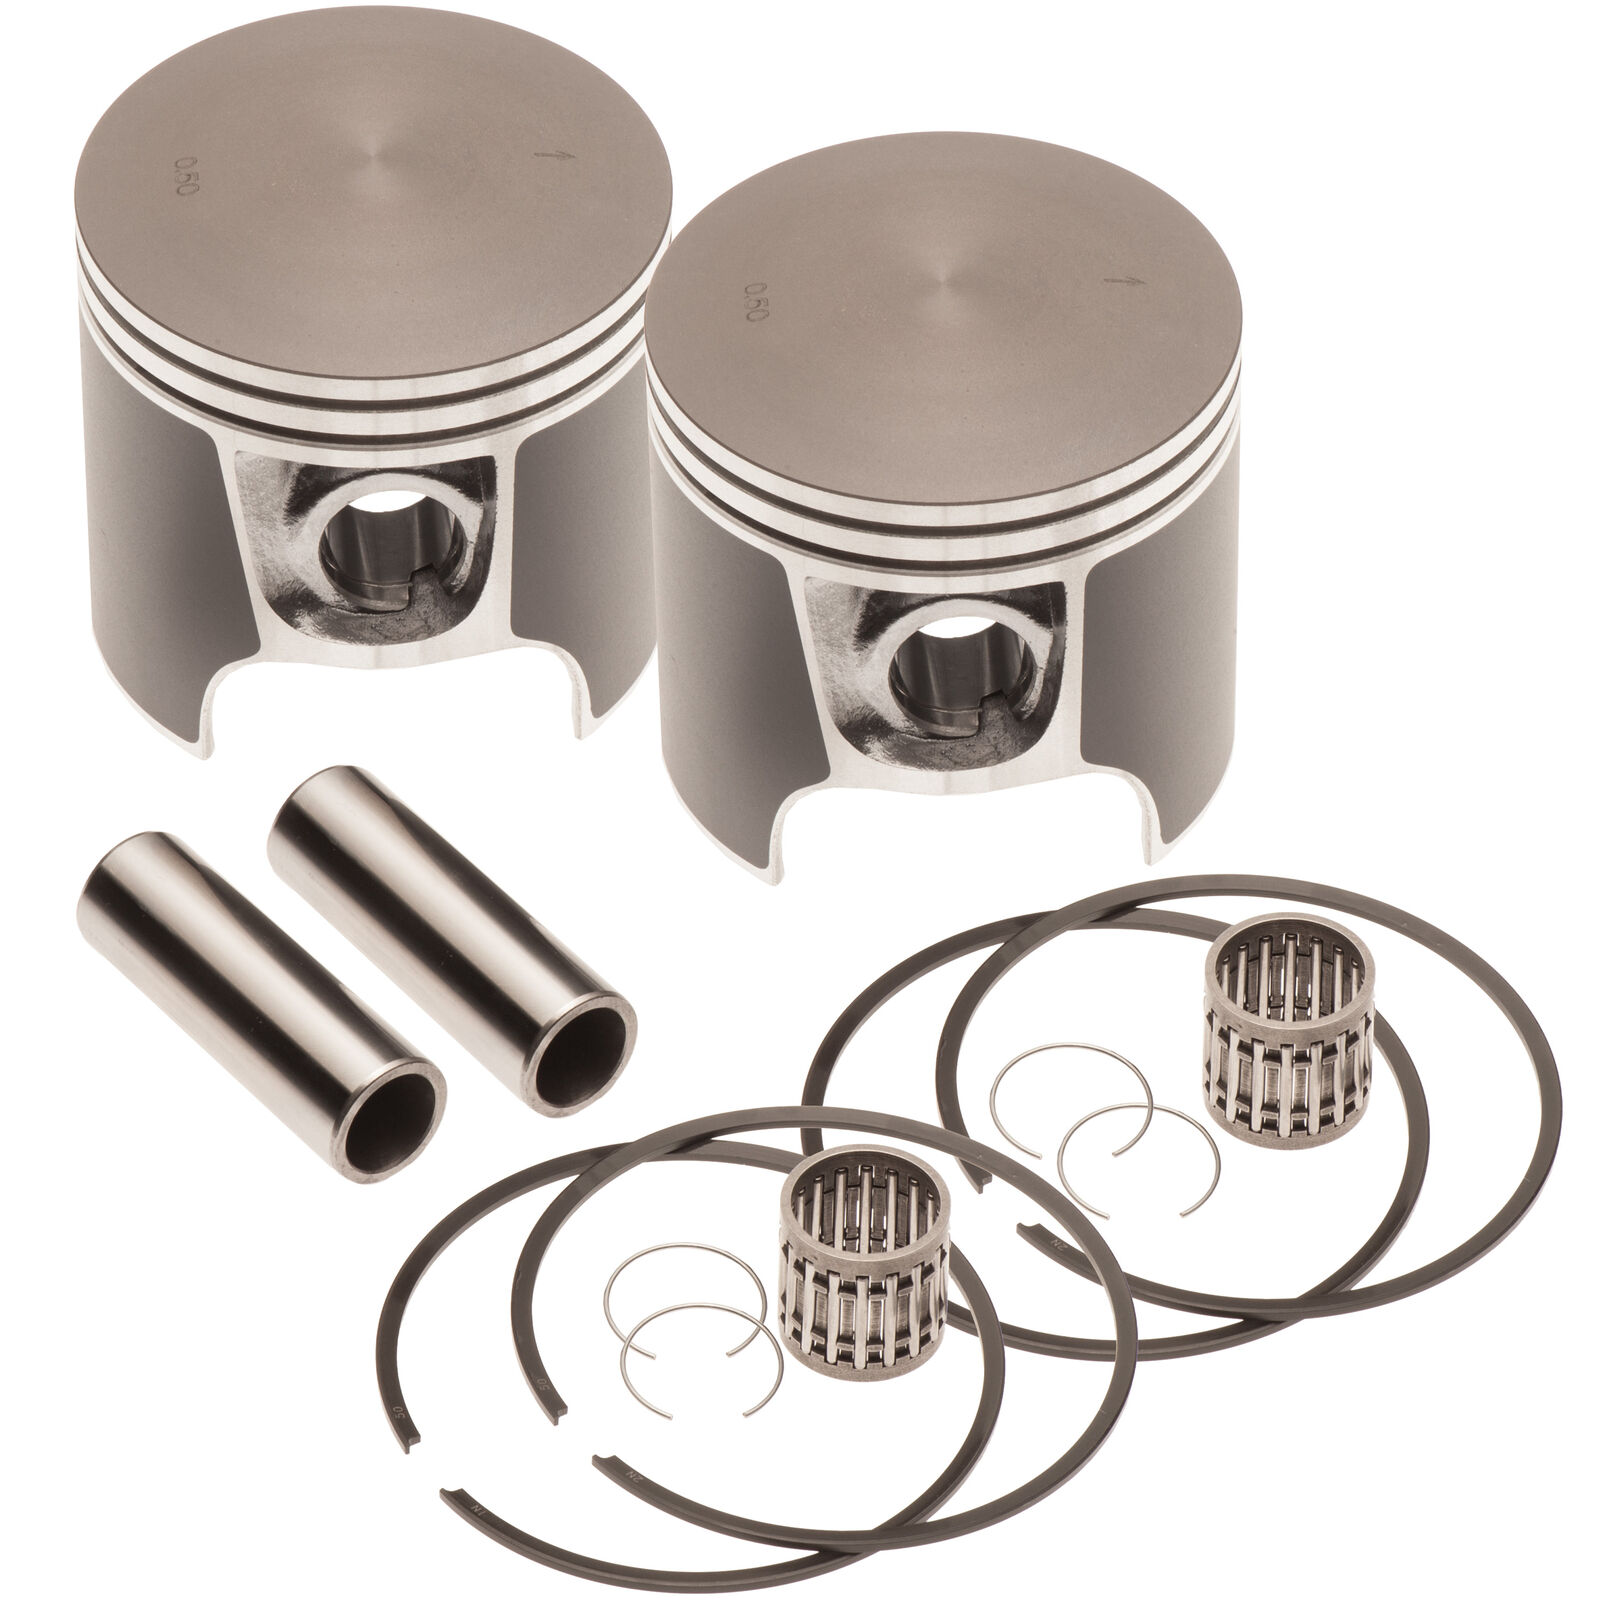 Dual Piston Kit for SeaDoo 951 Carbureted RX LRV XP GTX GSX Limited .50MM Over